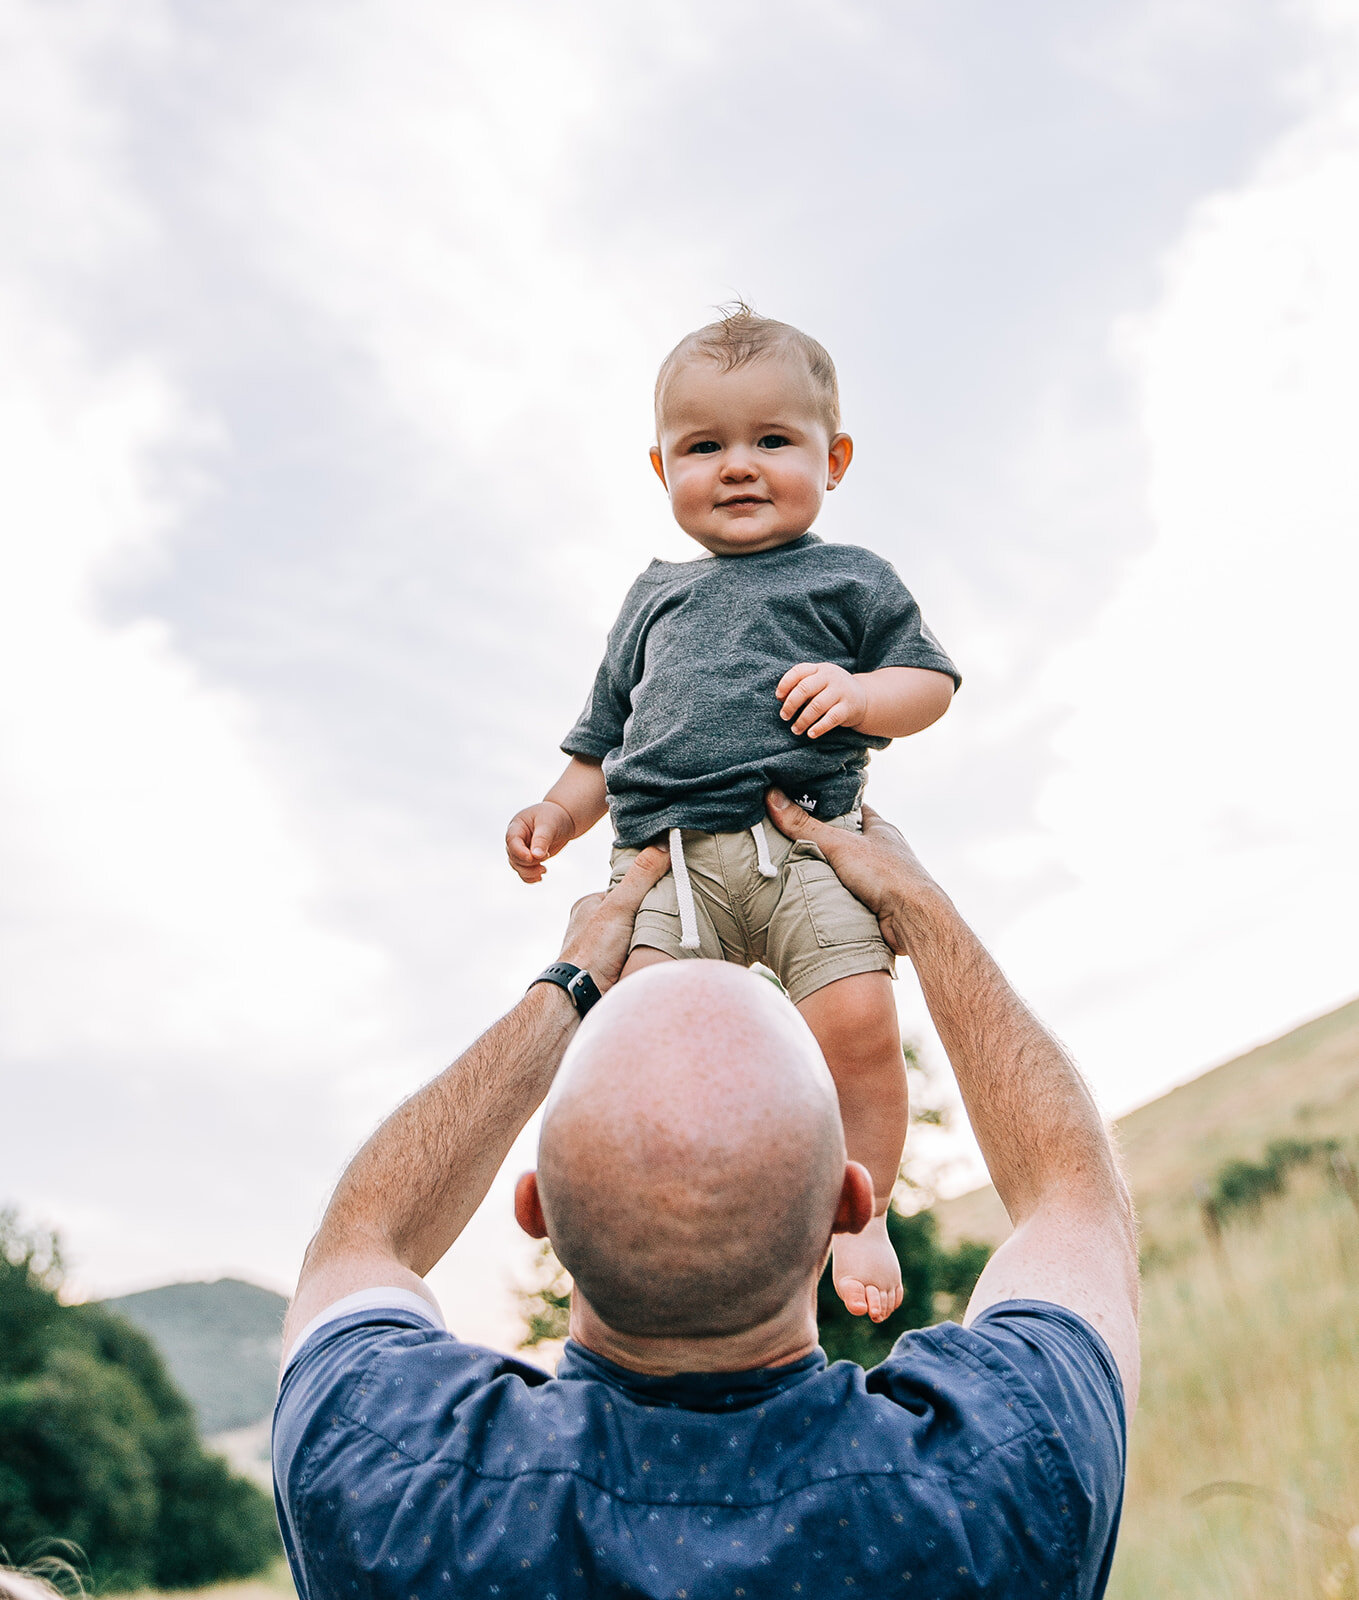  young boy baby boy outfit ideas for summer family photos classy cute outfits grey shirt dad holding baby boy up in the air cute photo of baby during family pictures flying baby up in the sky small family portraits paradise utah bella alder photograp